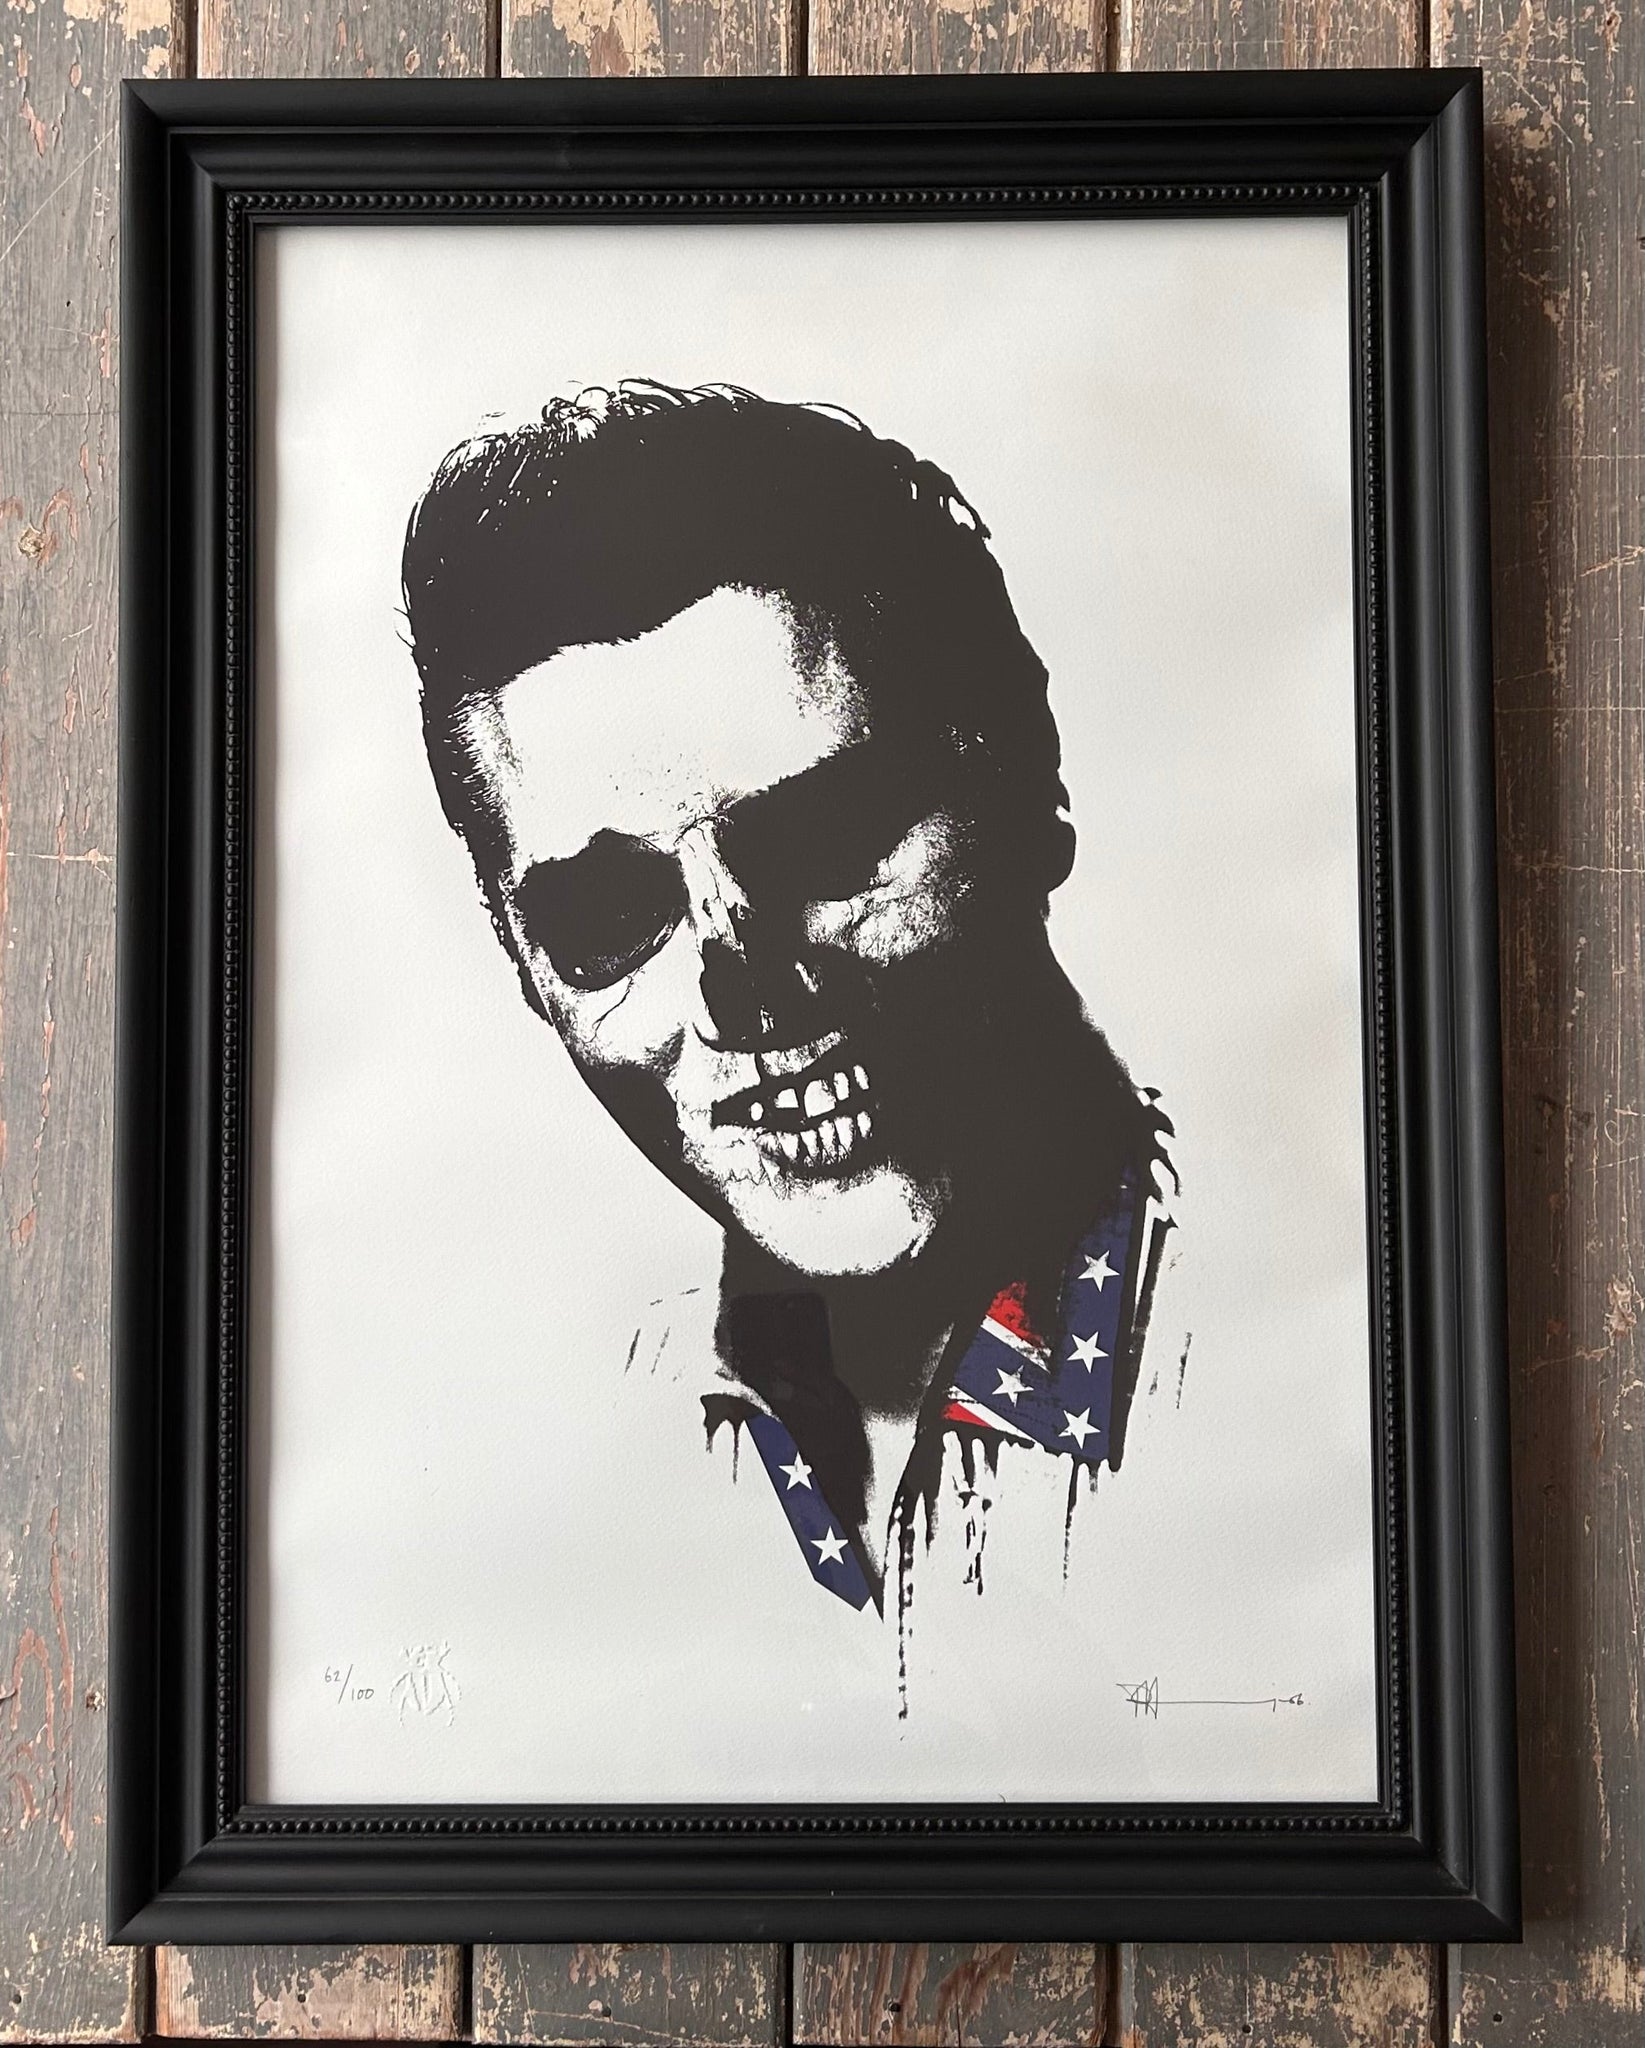 Paul Insect - Dead Elvis (Signed & Framed)